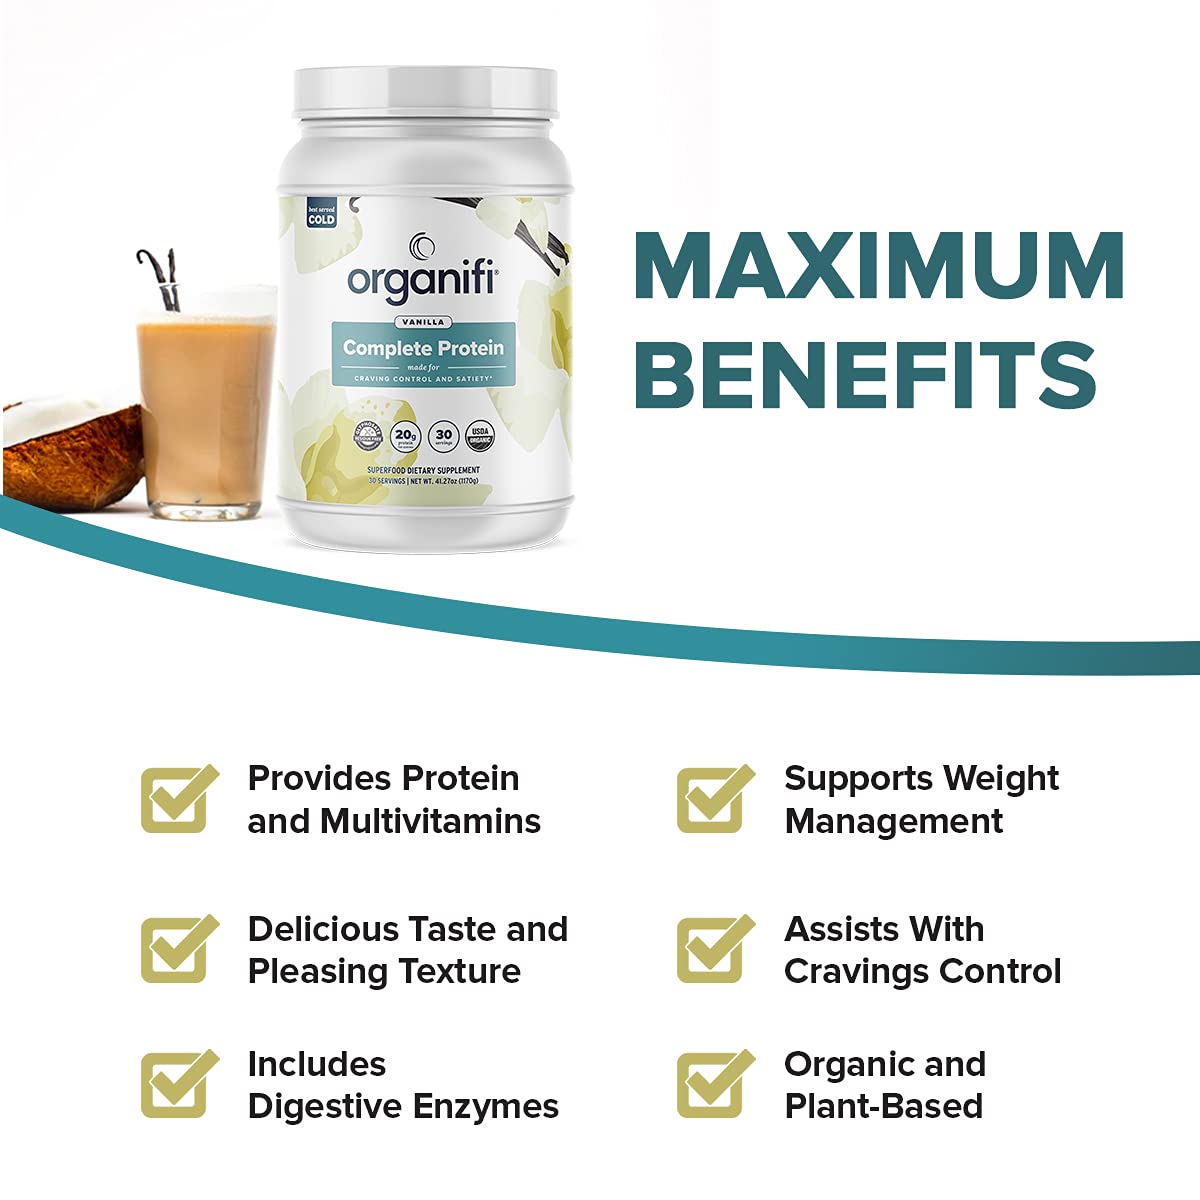 a list of benefits of Organifi Complete Protein Vanilla